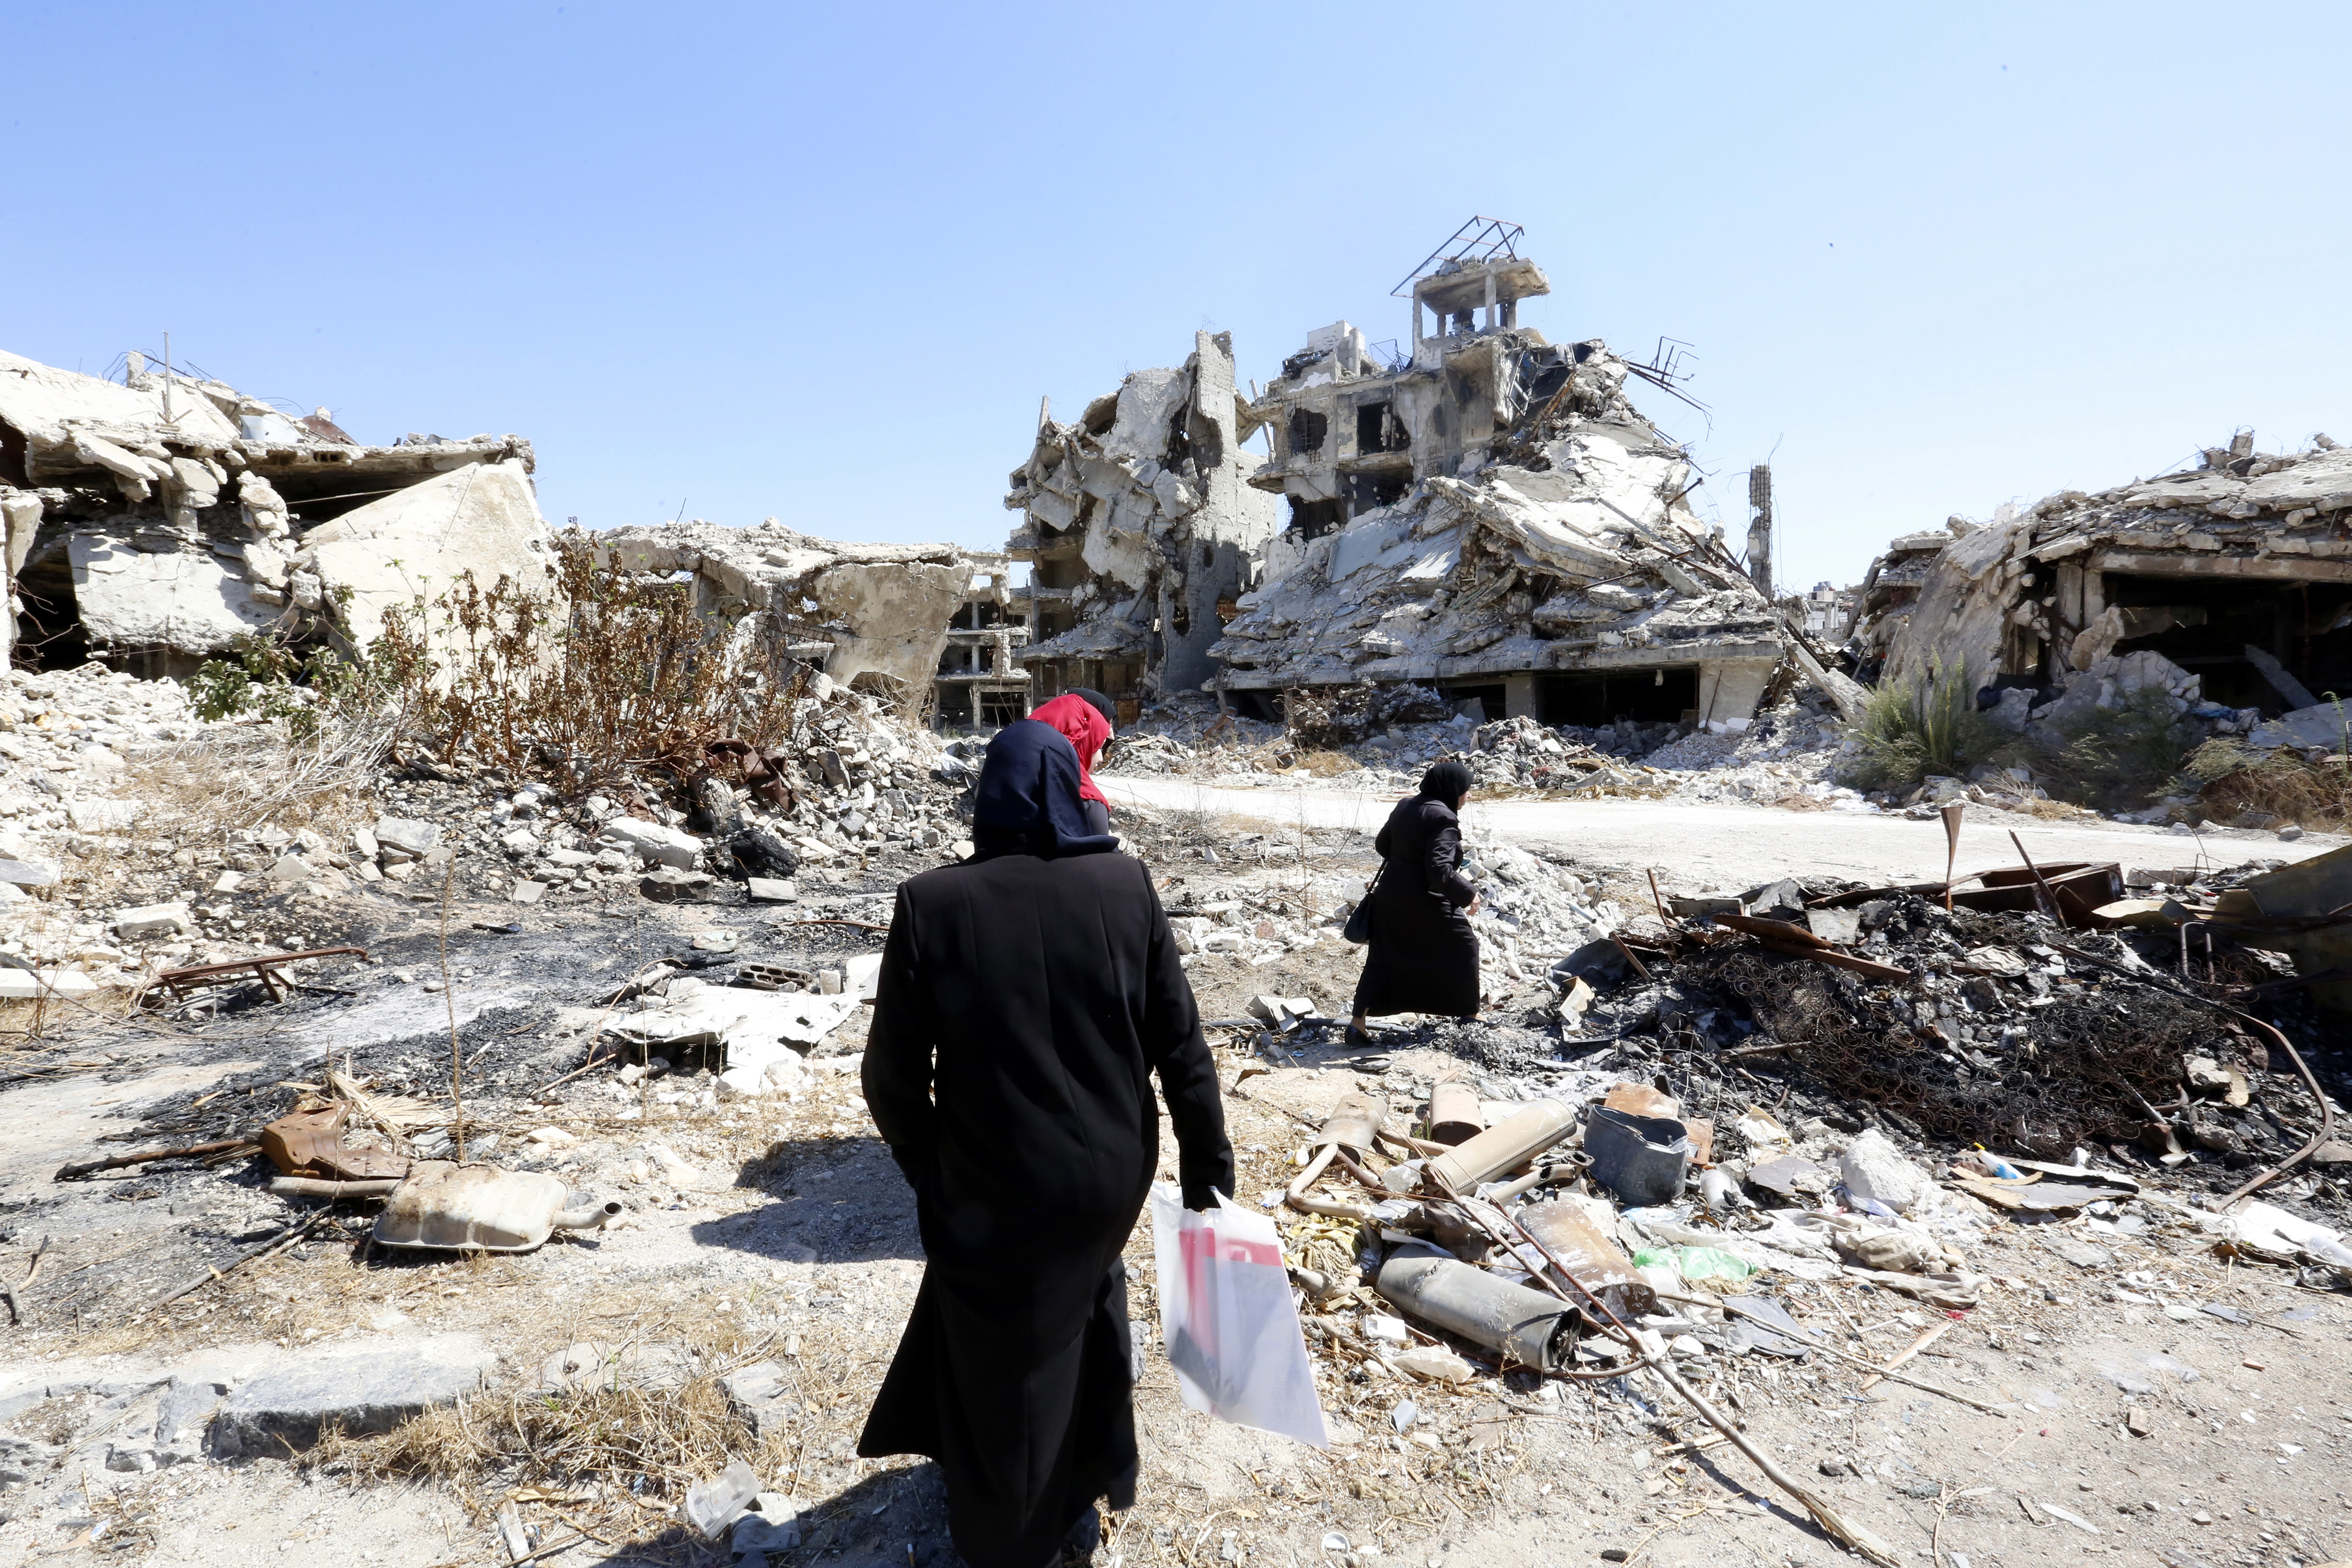 People walk amid rubble Sept. 19 in the city of Homs, Syria. (CNS photo/Mohammed Badra, EPA)